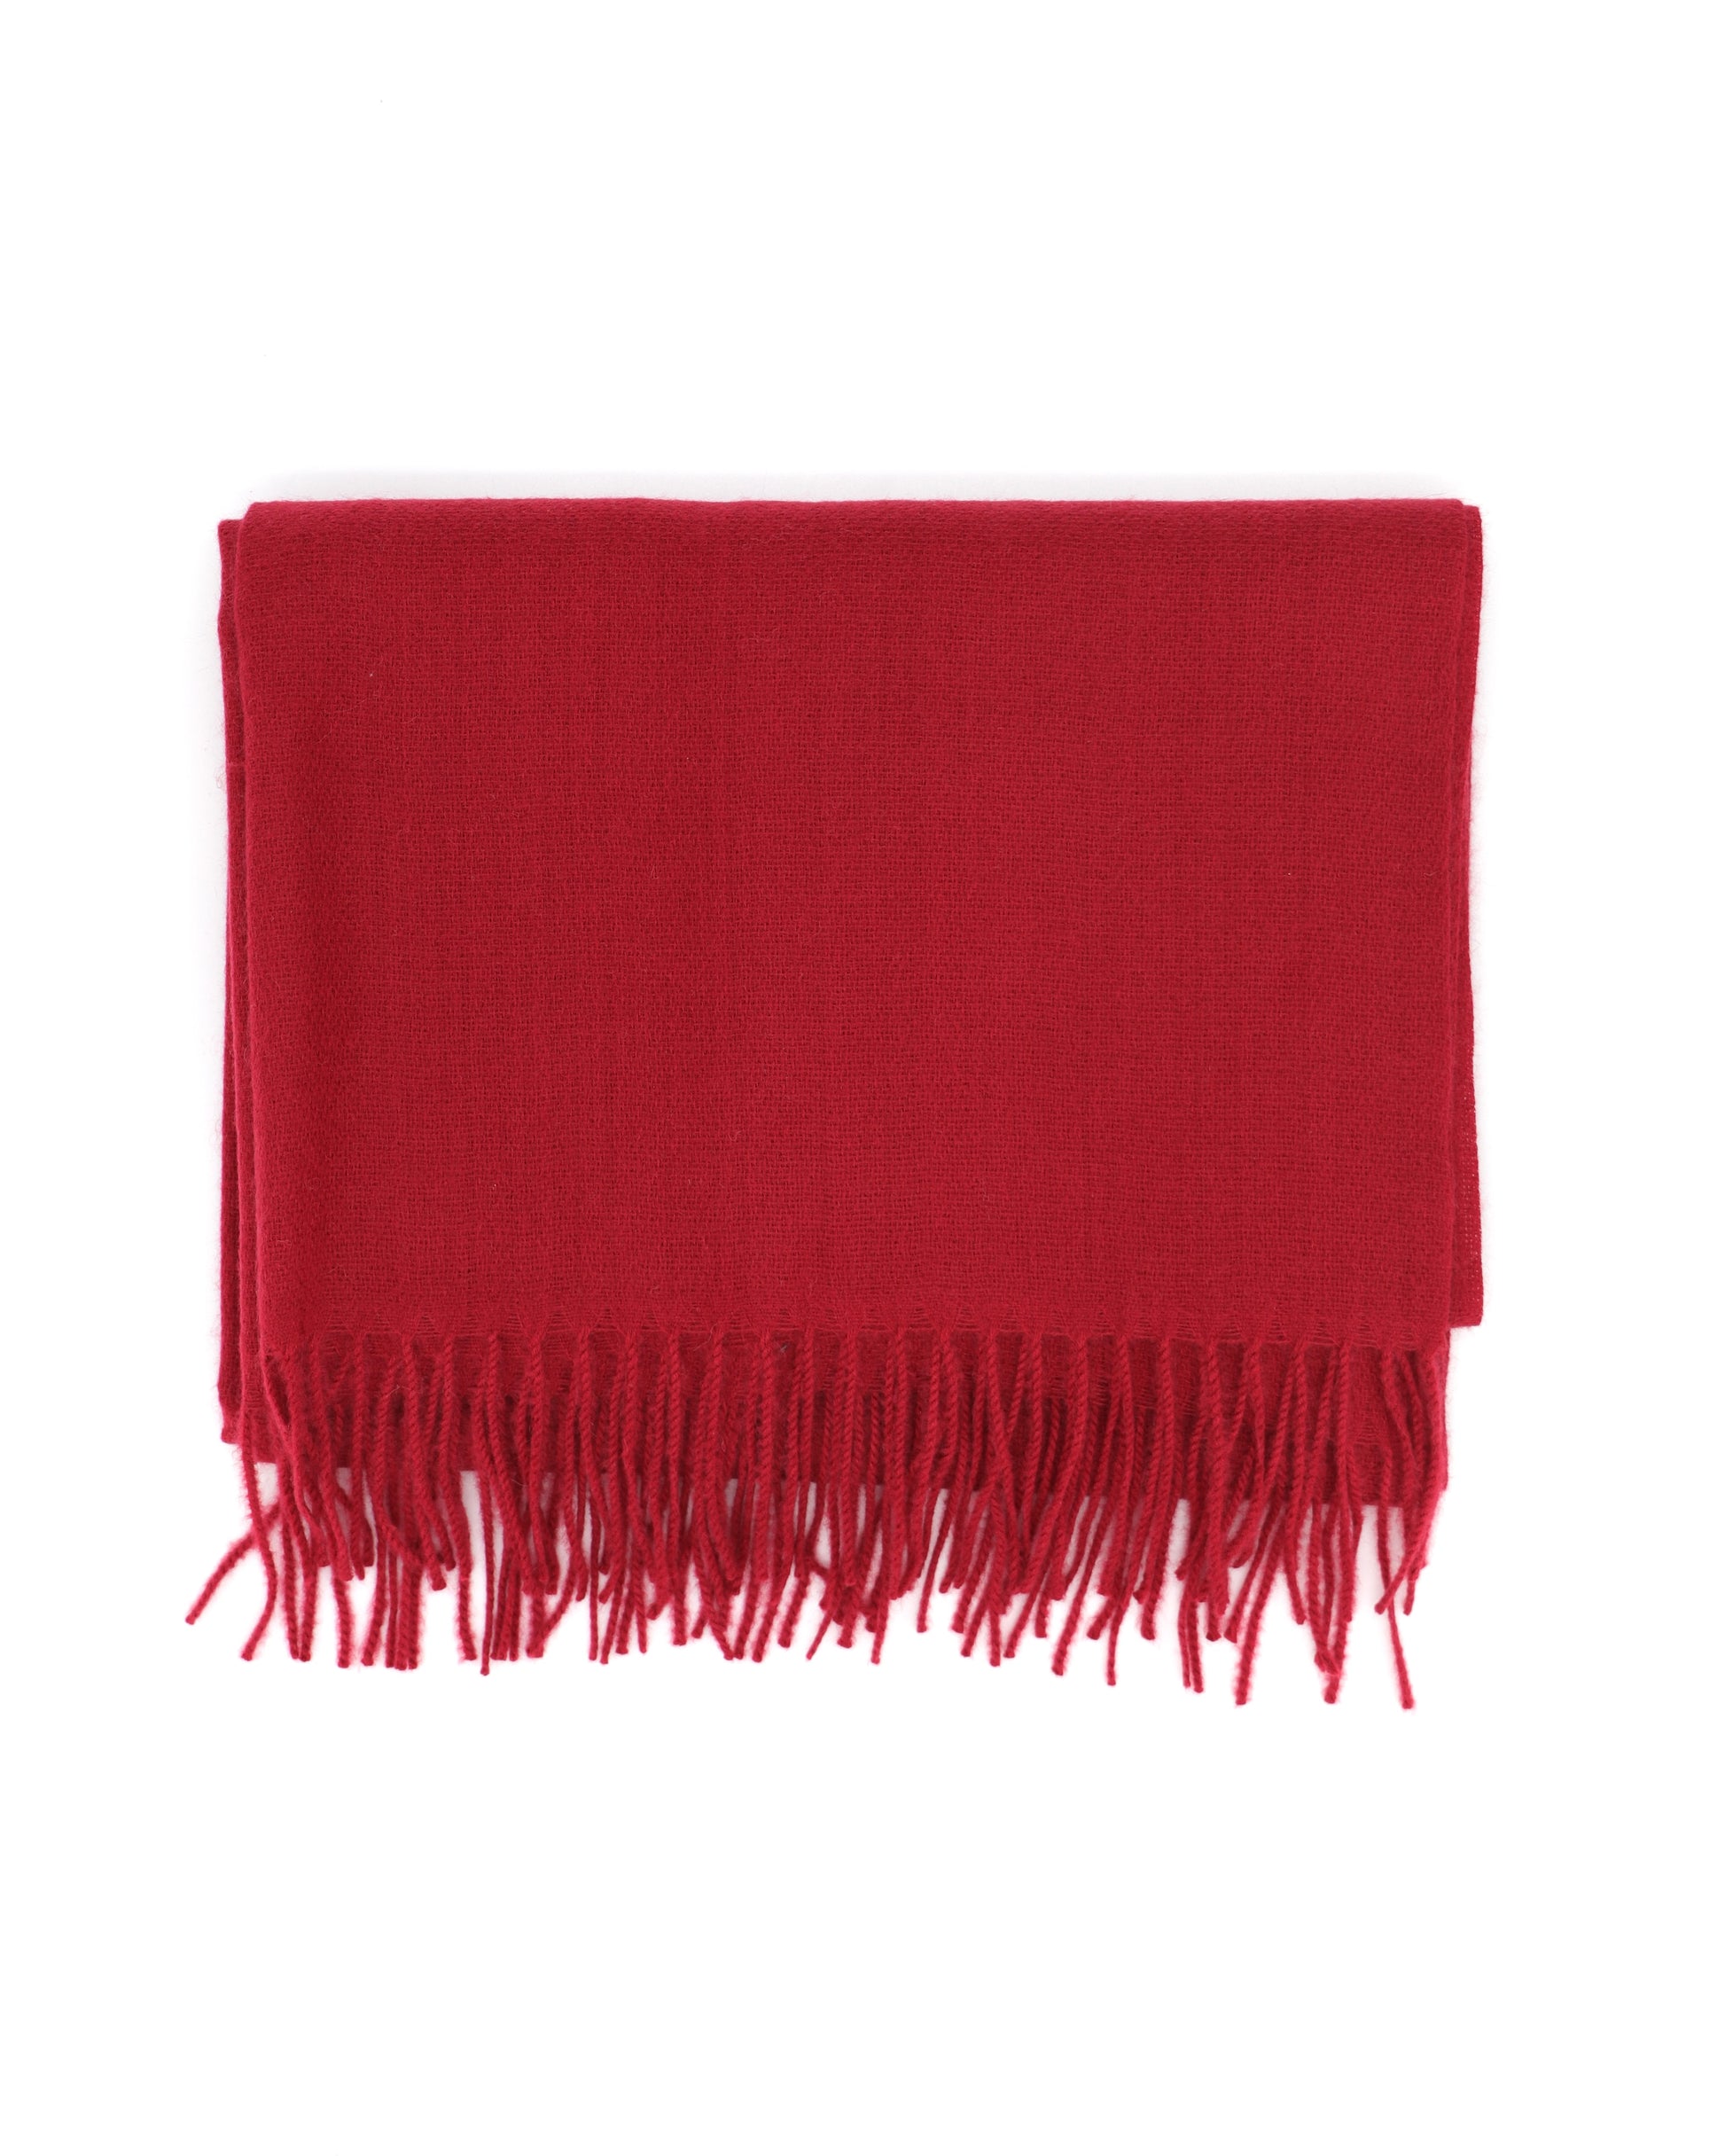 This Scarf is a finest XL-Size soft scarf from Villanelle. A luxurious accessory for women made from the softest wool and cashmere blend for extreme comfort and warmth. It is made in a trendy burgundy red color for a great look and feeling. A cozy accessory for cold winter, autumn and spring days. This product is sourced and manufactured in Poland. This product is sourced and manufactured in Poland.